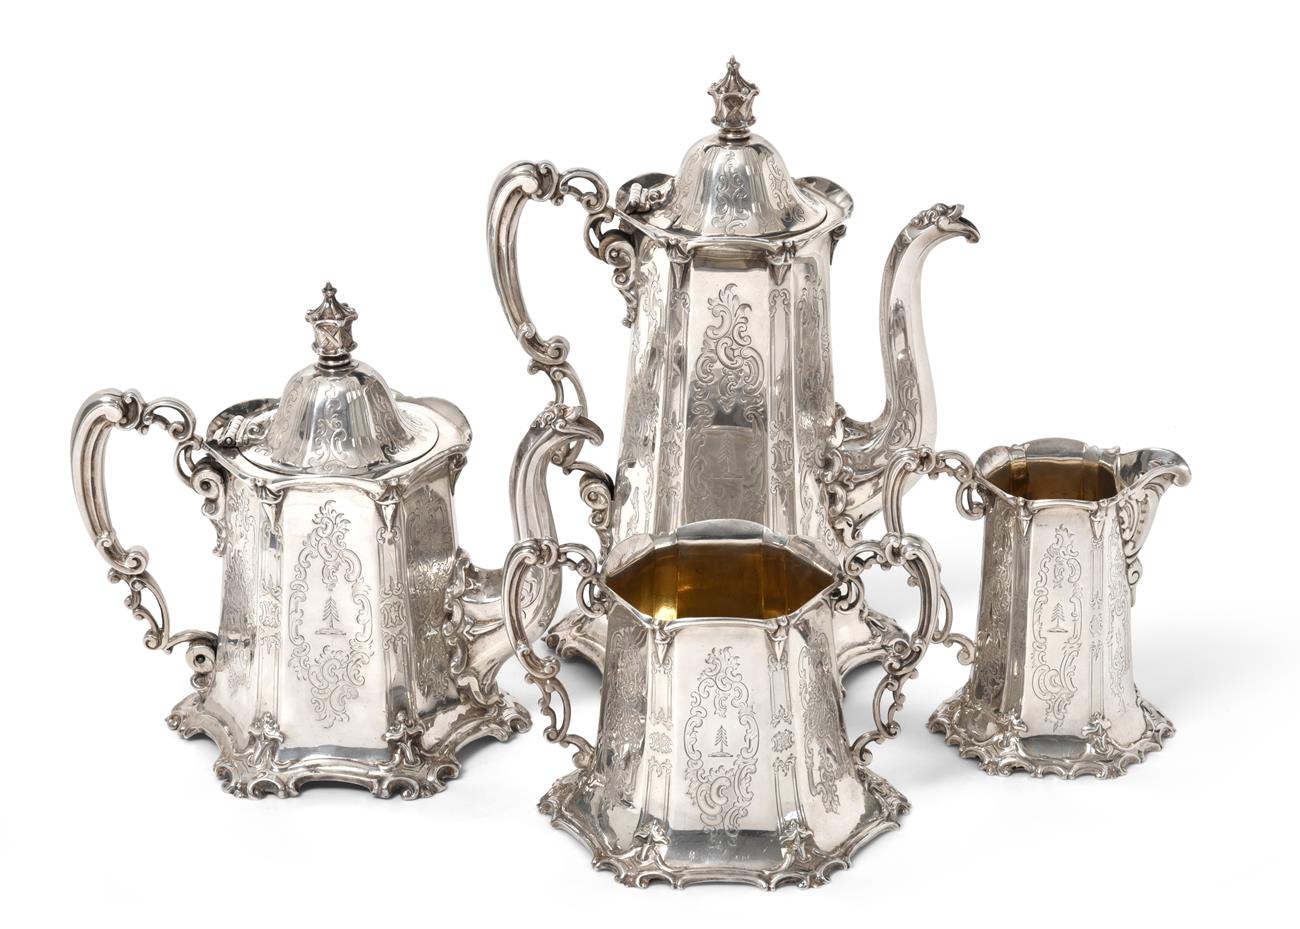 Lot 2253 - A Four-Piece Victorian Silver Tea and Coffee-Service, by George Angell, London, 1850, each...